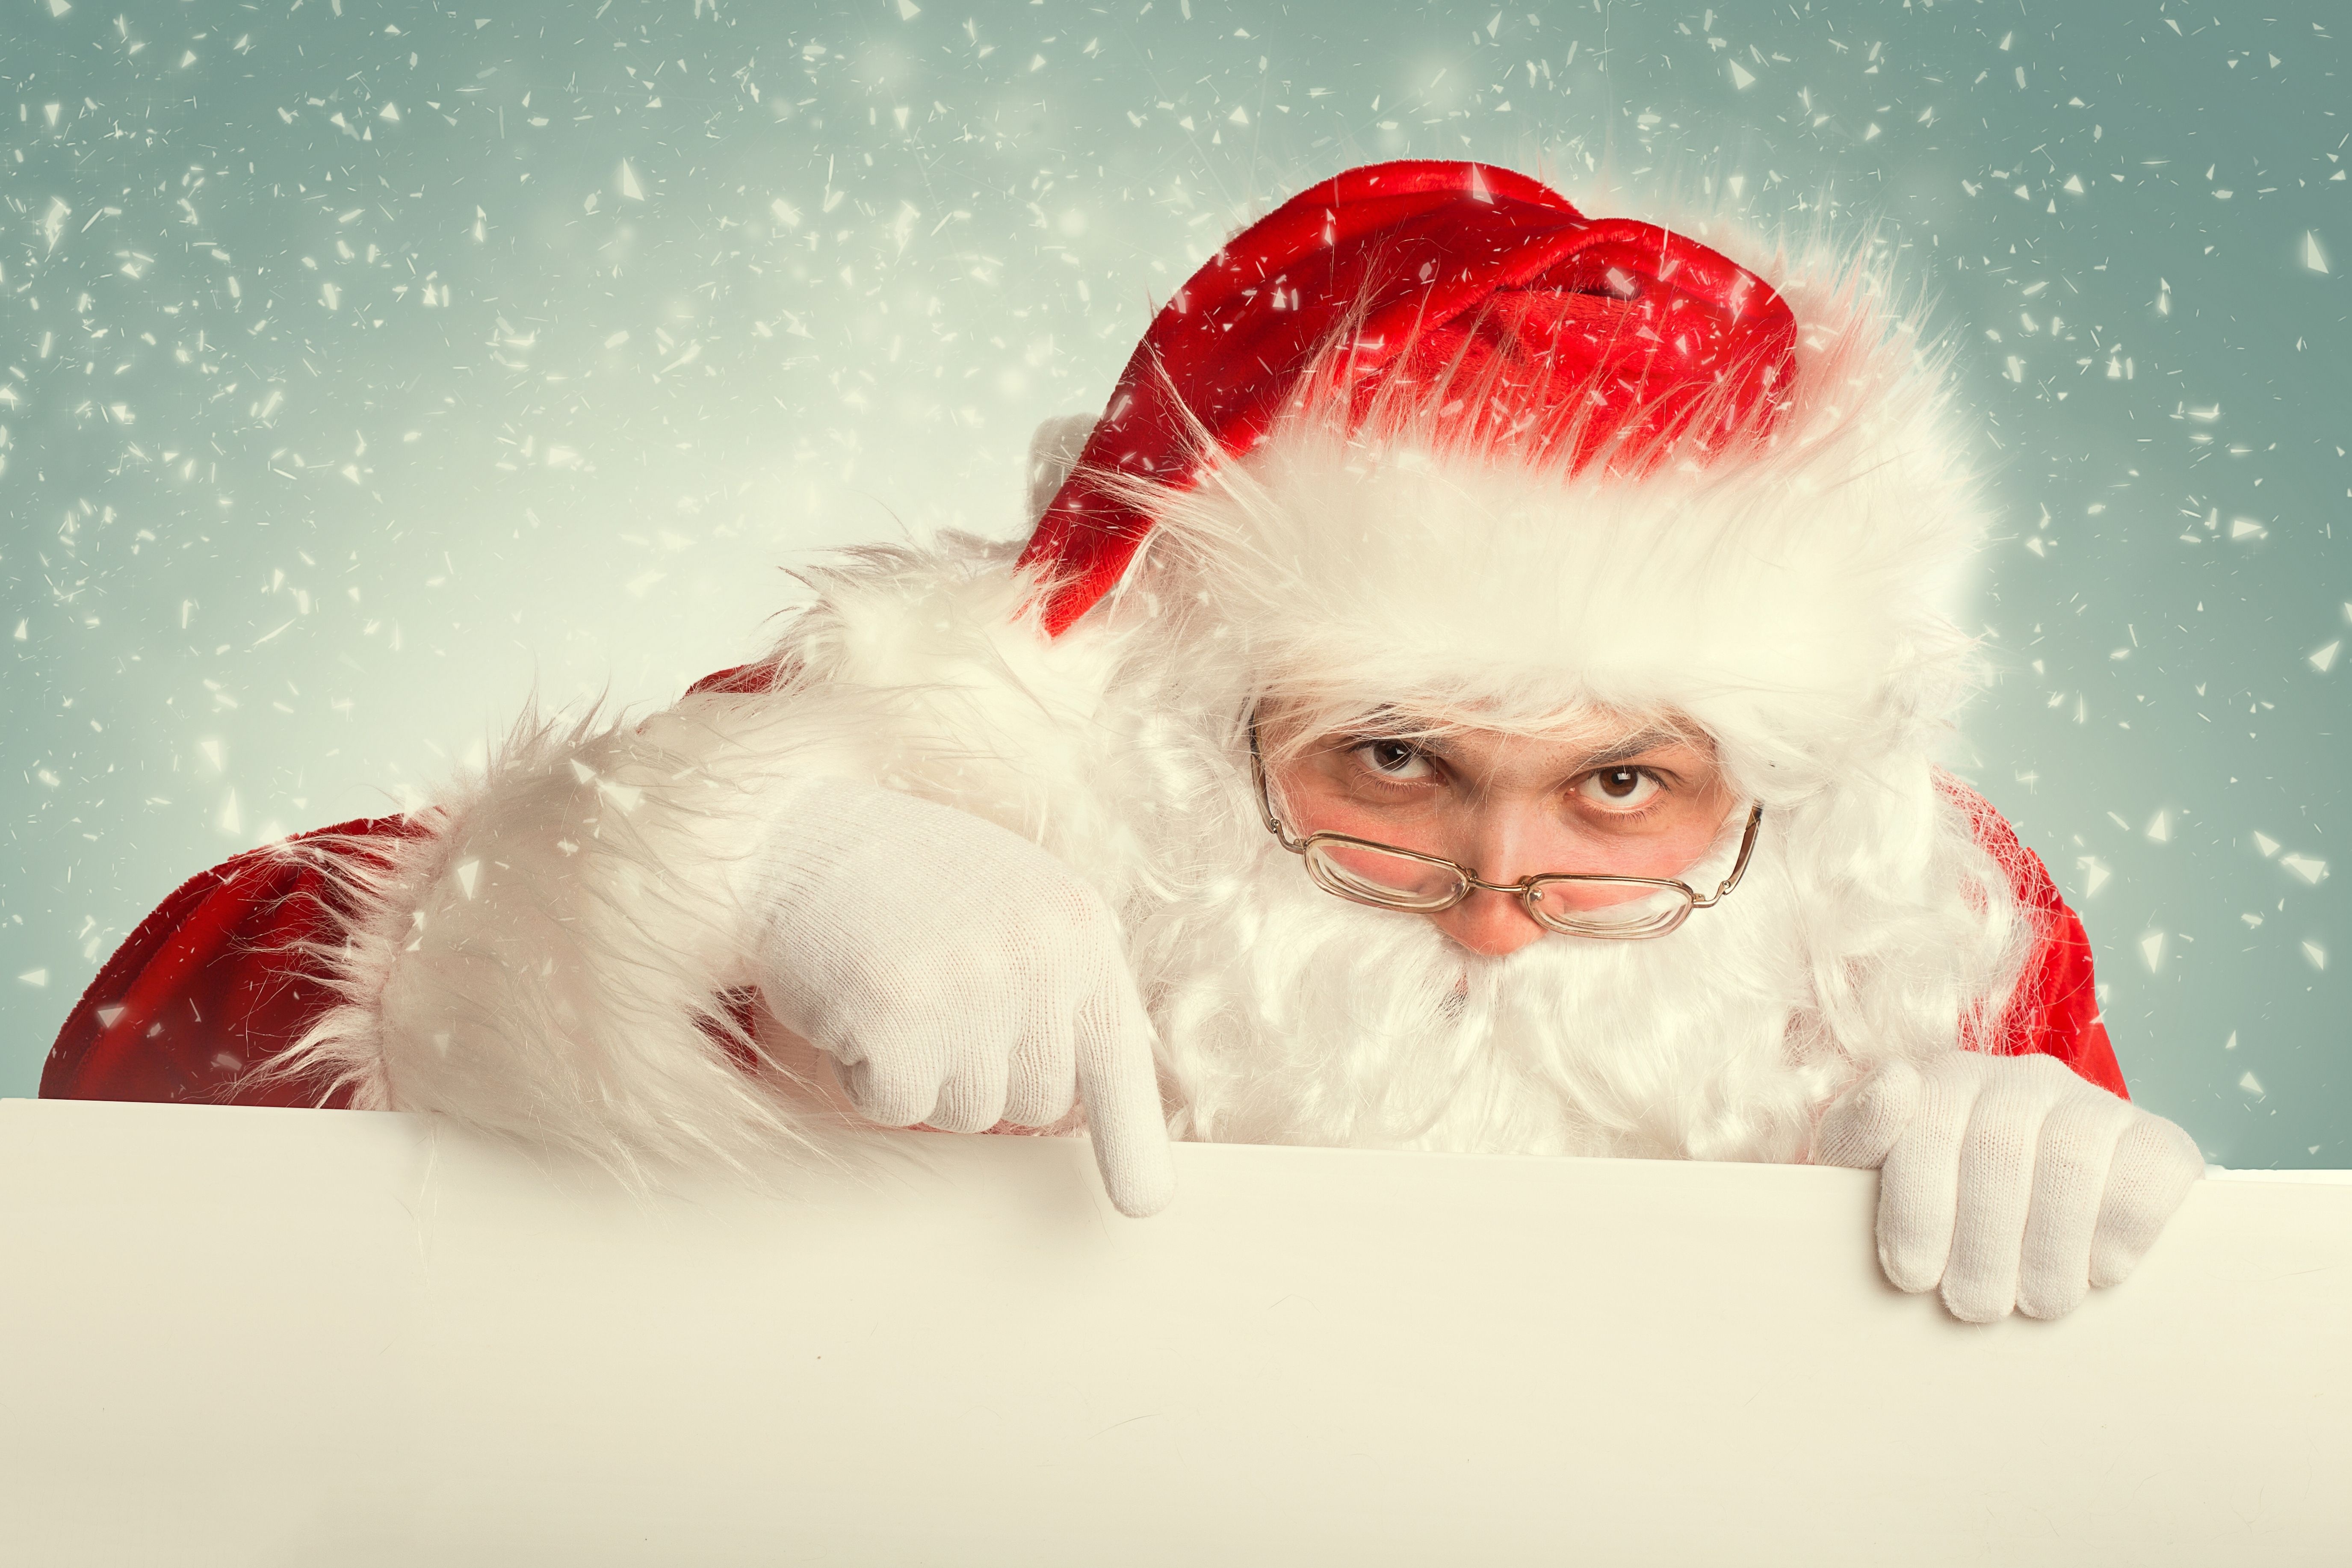 Santa Claus Wallpapers High Quality | Download Free